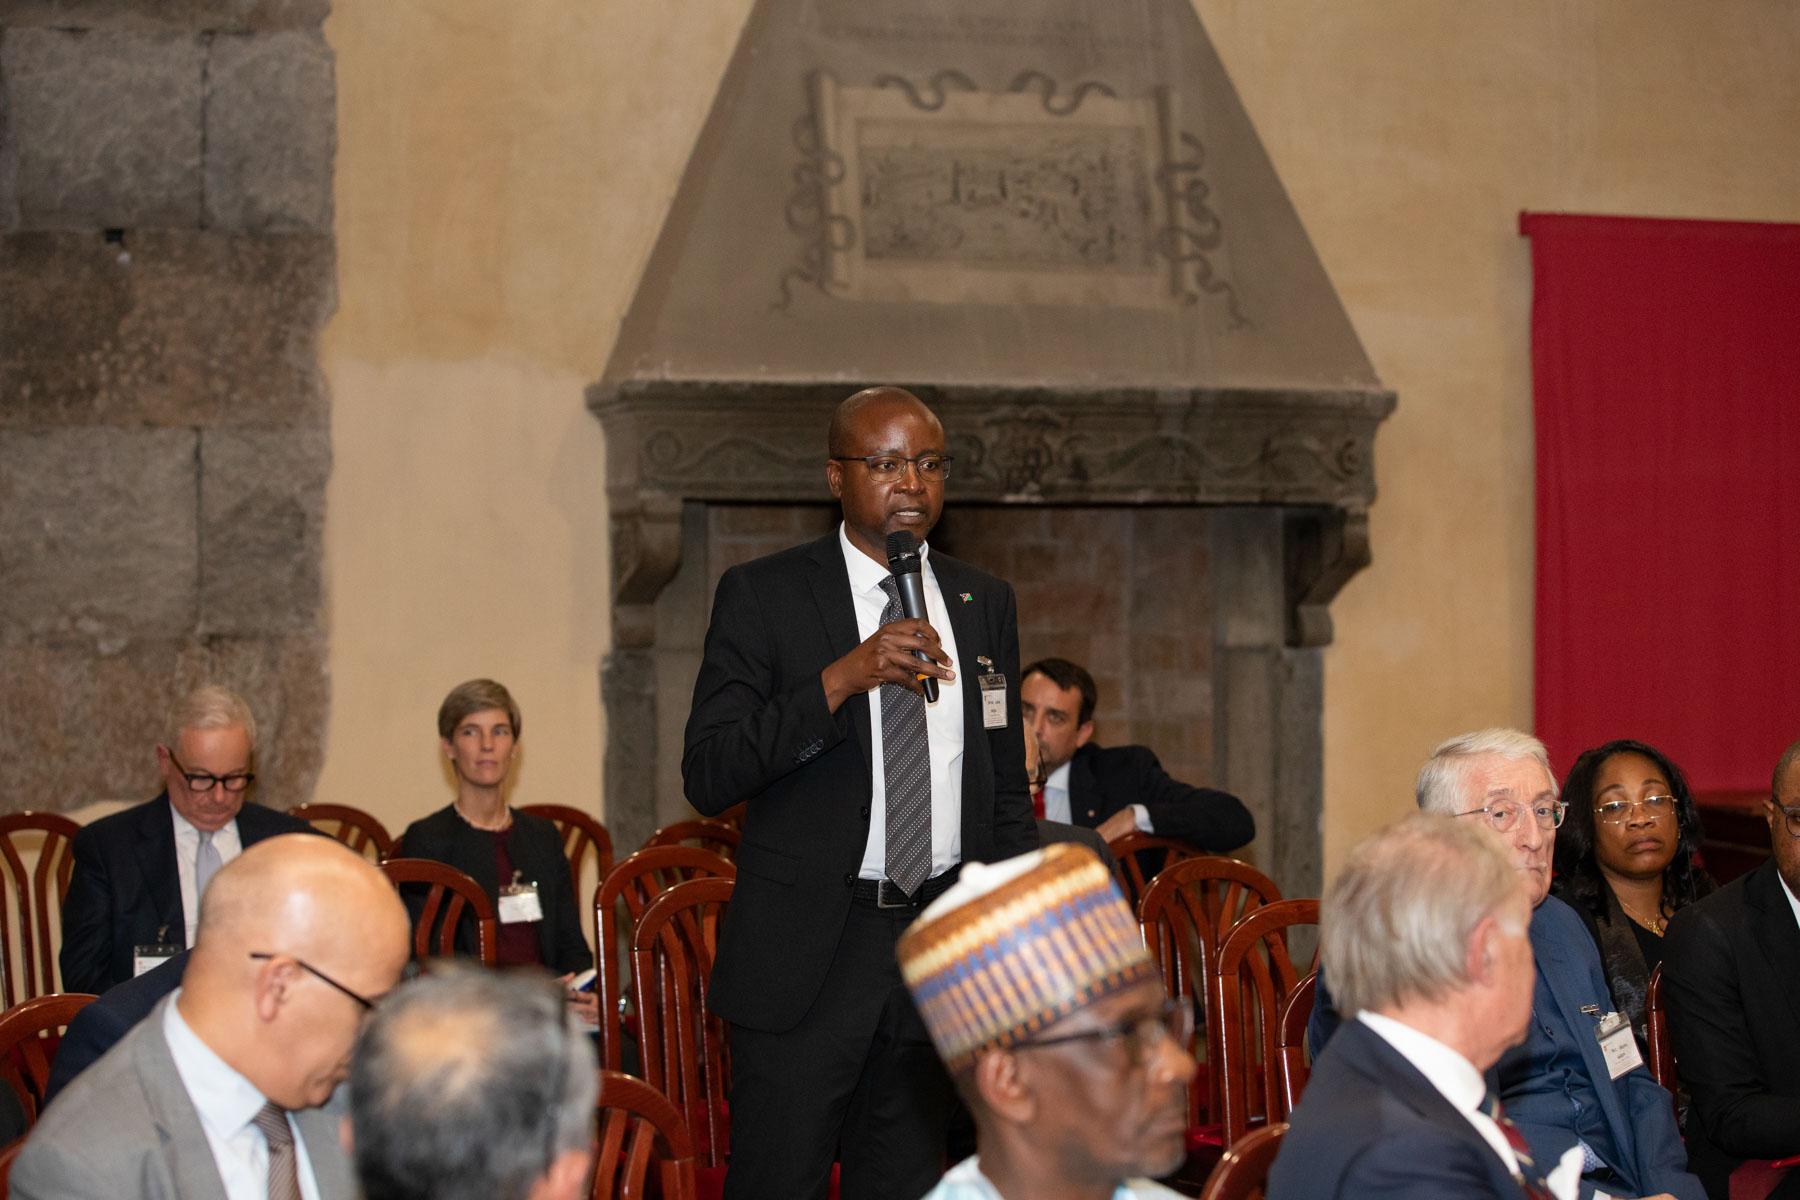 Two conferences with diplomats from Asia-Oceania and Africa